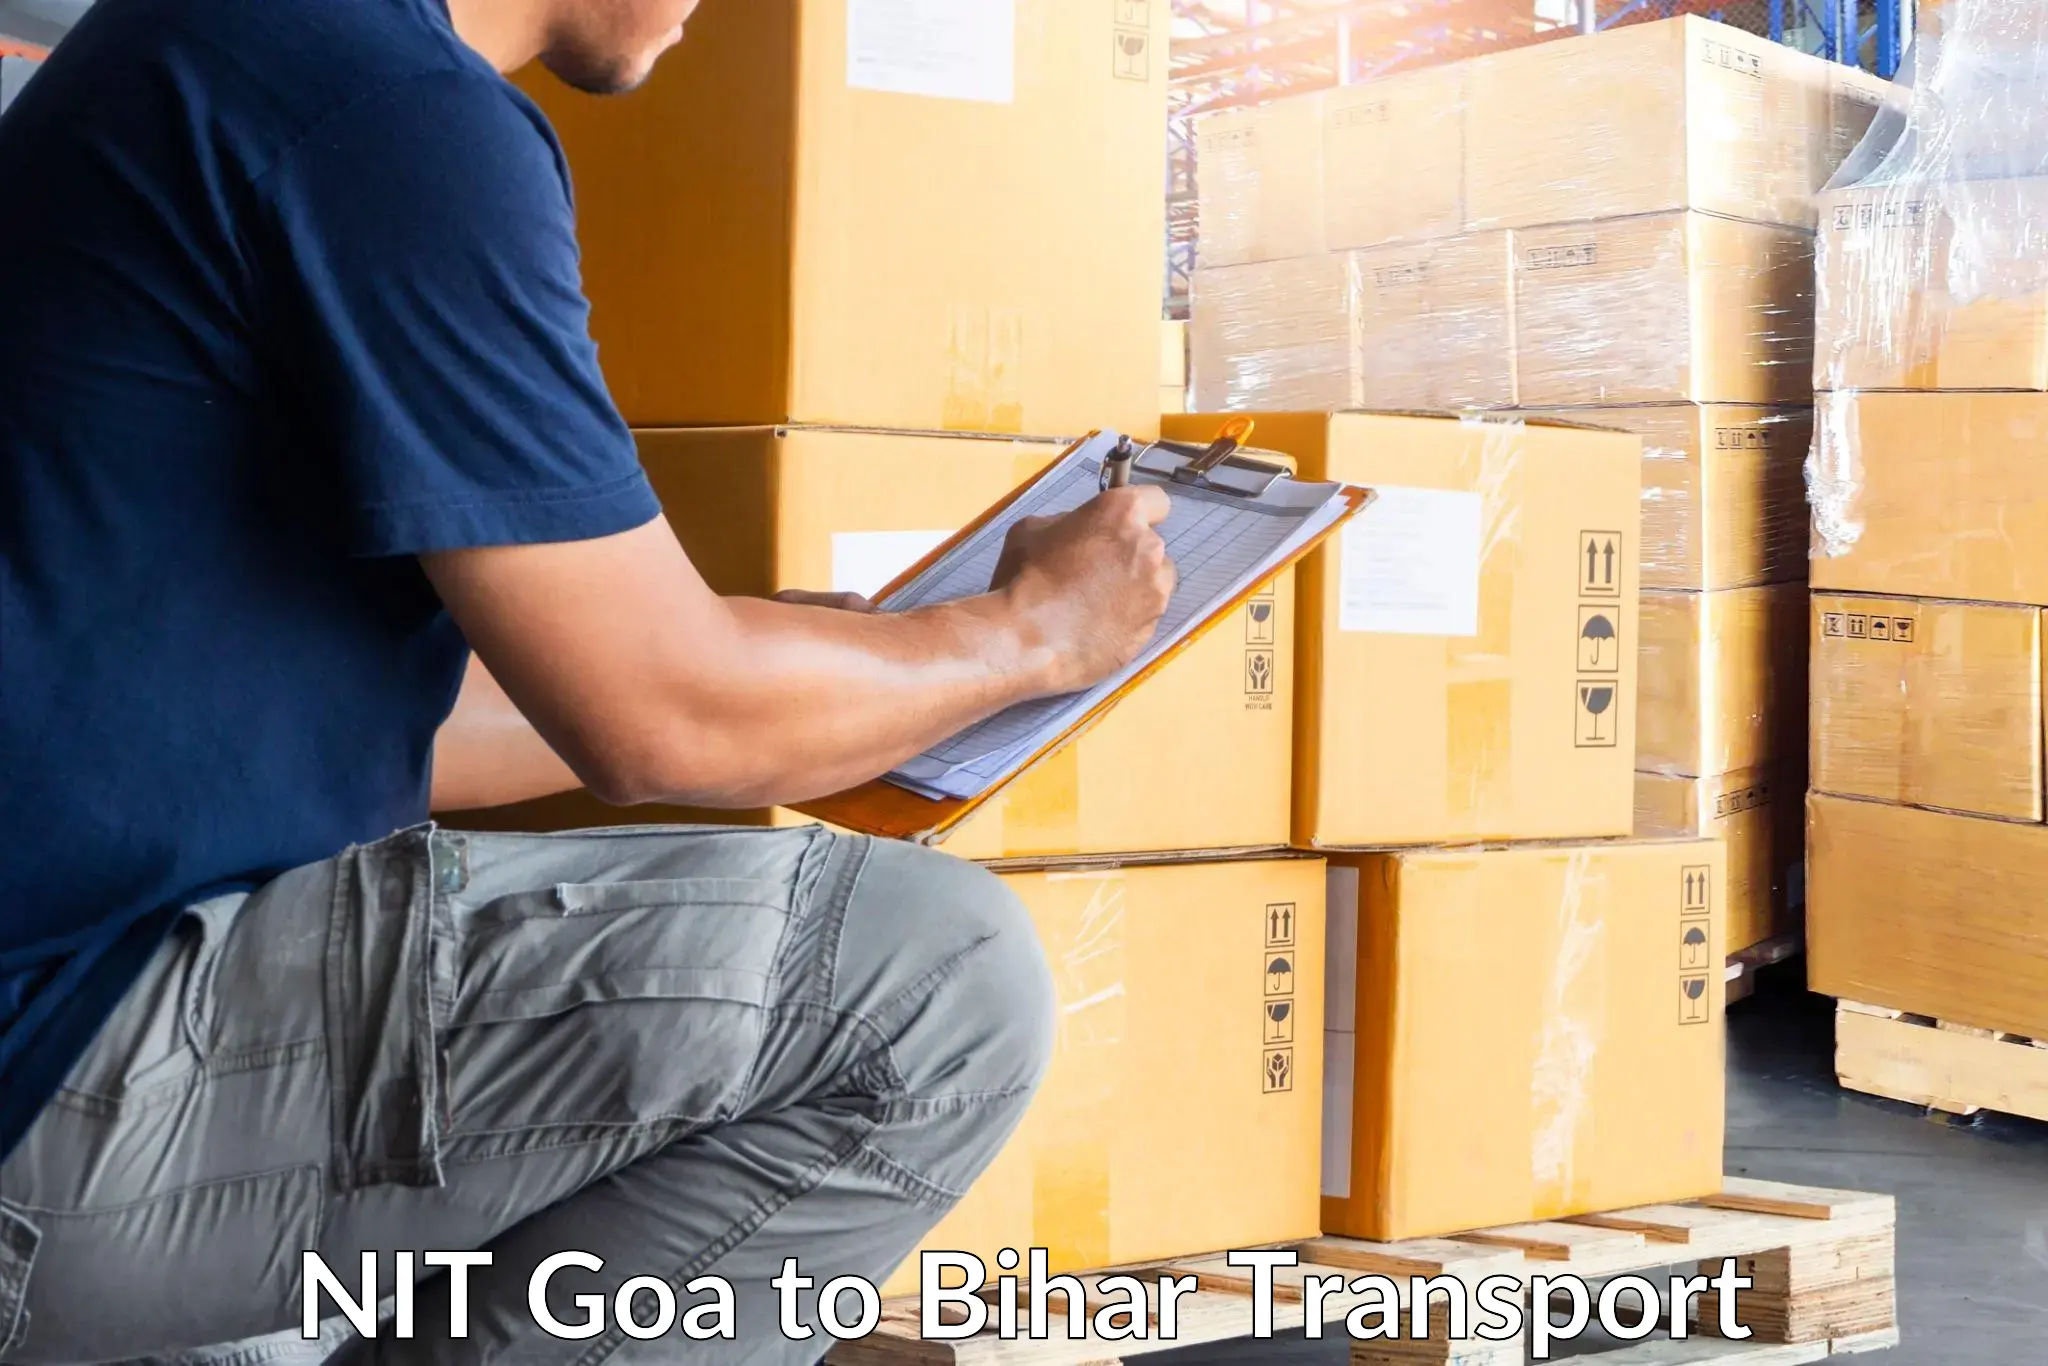 Air freight transport services NIT Goa to Punsia